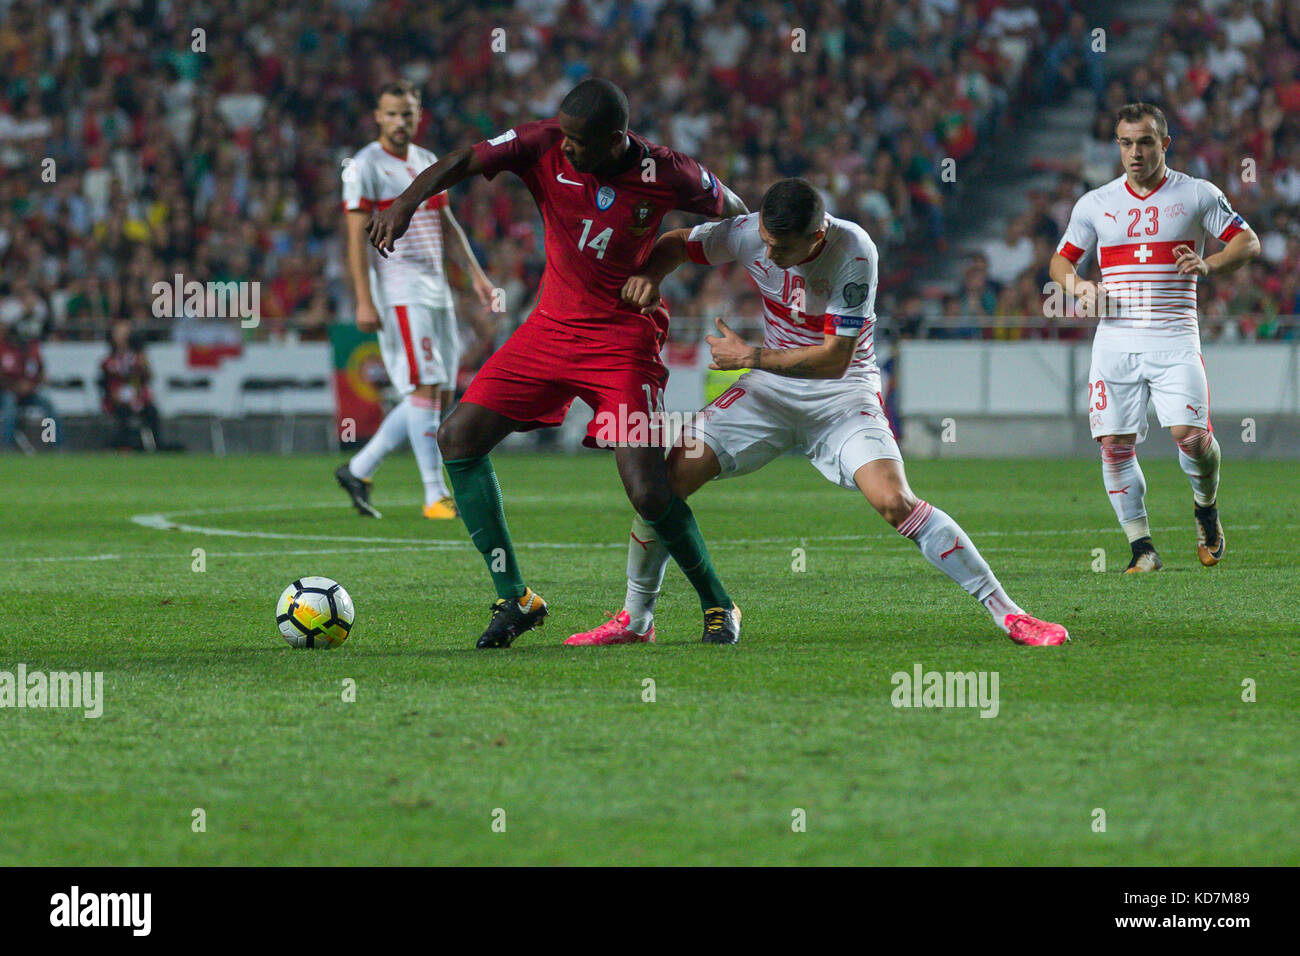 Lisbon, Portugal. 10th Oct, 2017. Portugal's midfielder William Carvalho (14) and Switzerland's midfielder Granit Xhaka (10) during the FIFA 2018 World Cup Qualifier between Portugal and Switzerland Credit: Alexandre de Sousa/Alamy Live News Stock Photo